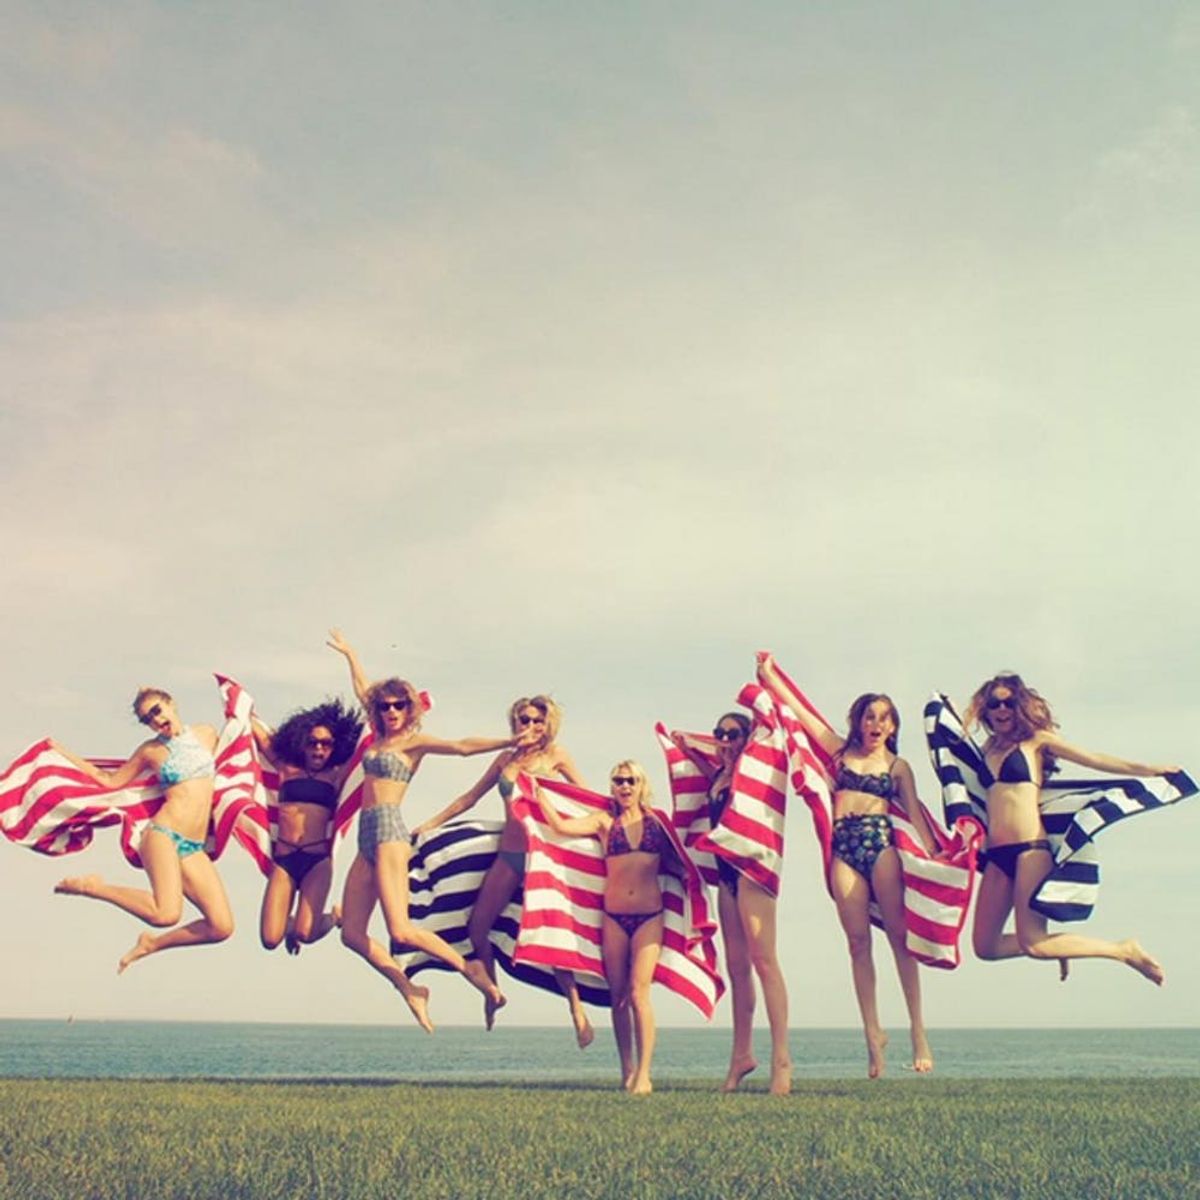 5 Things You Didn’t Know About Taylor Swift’s Epic Fourth of July Party